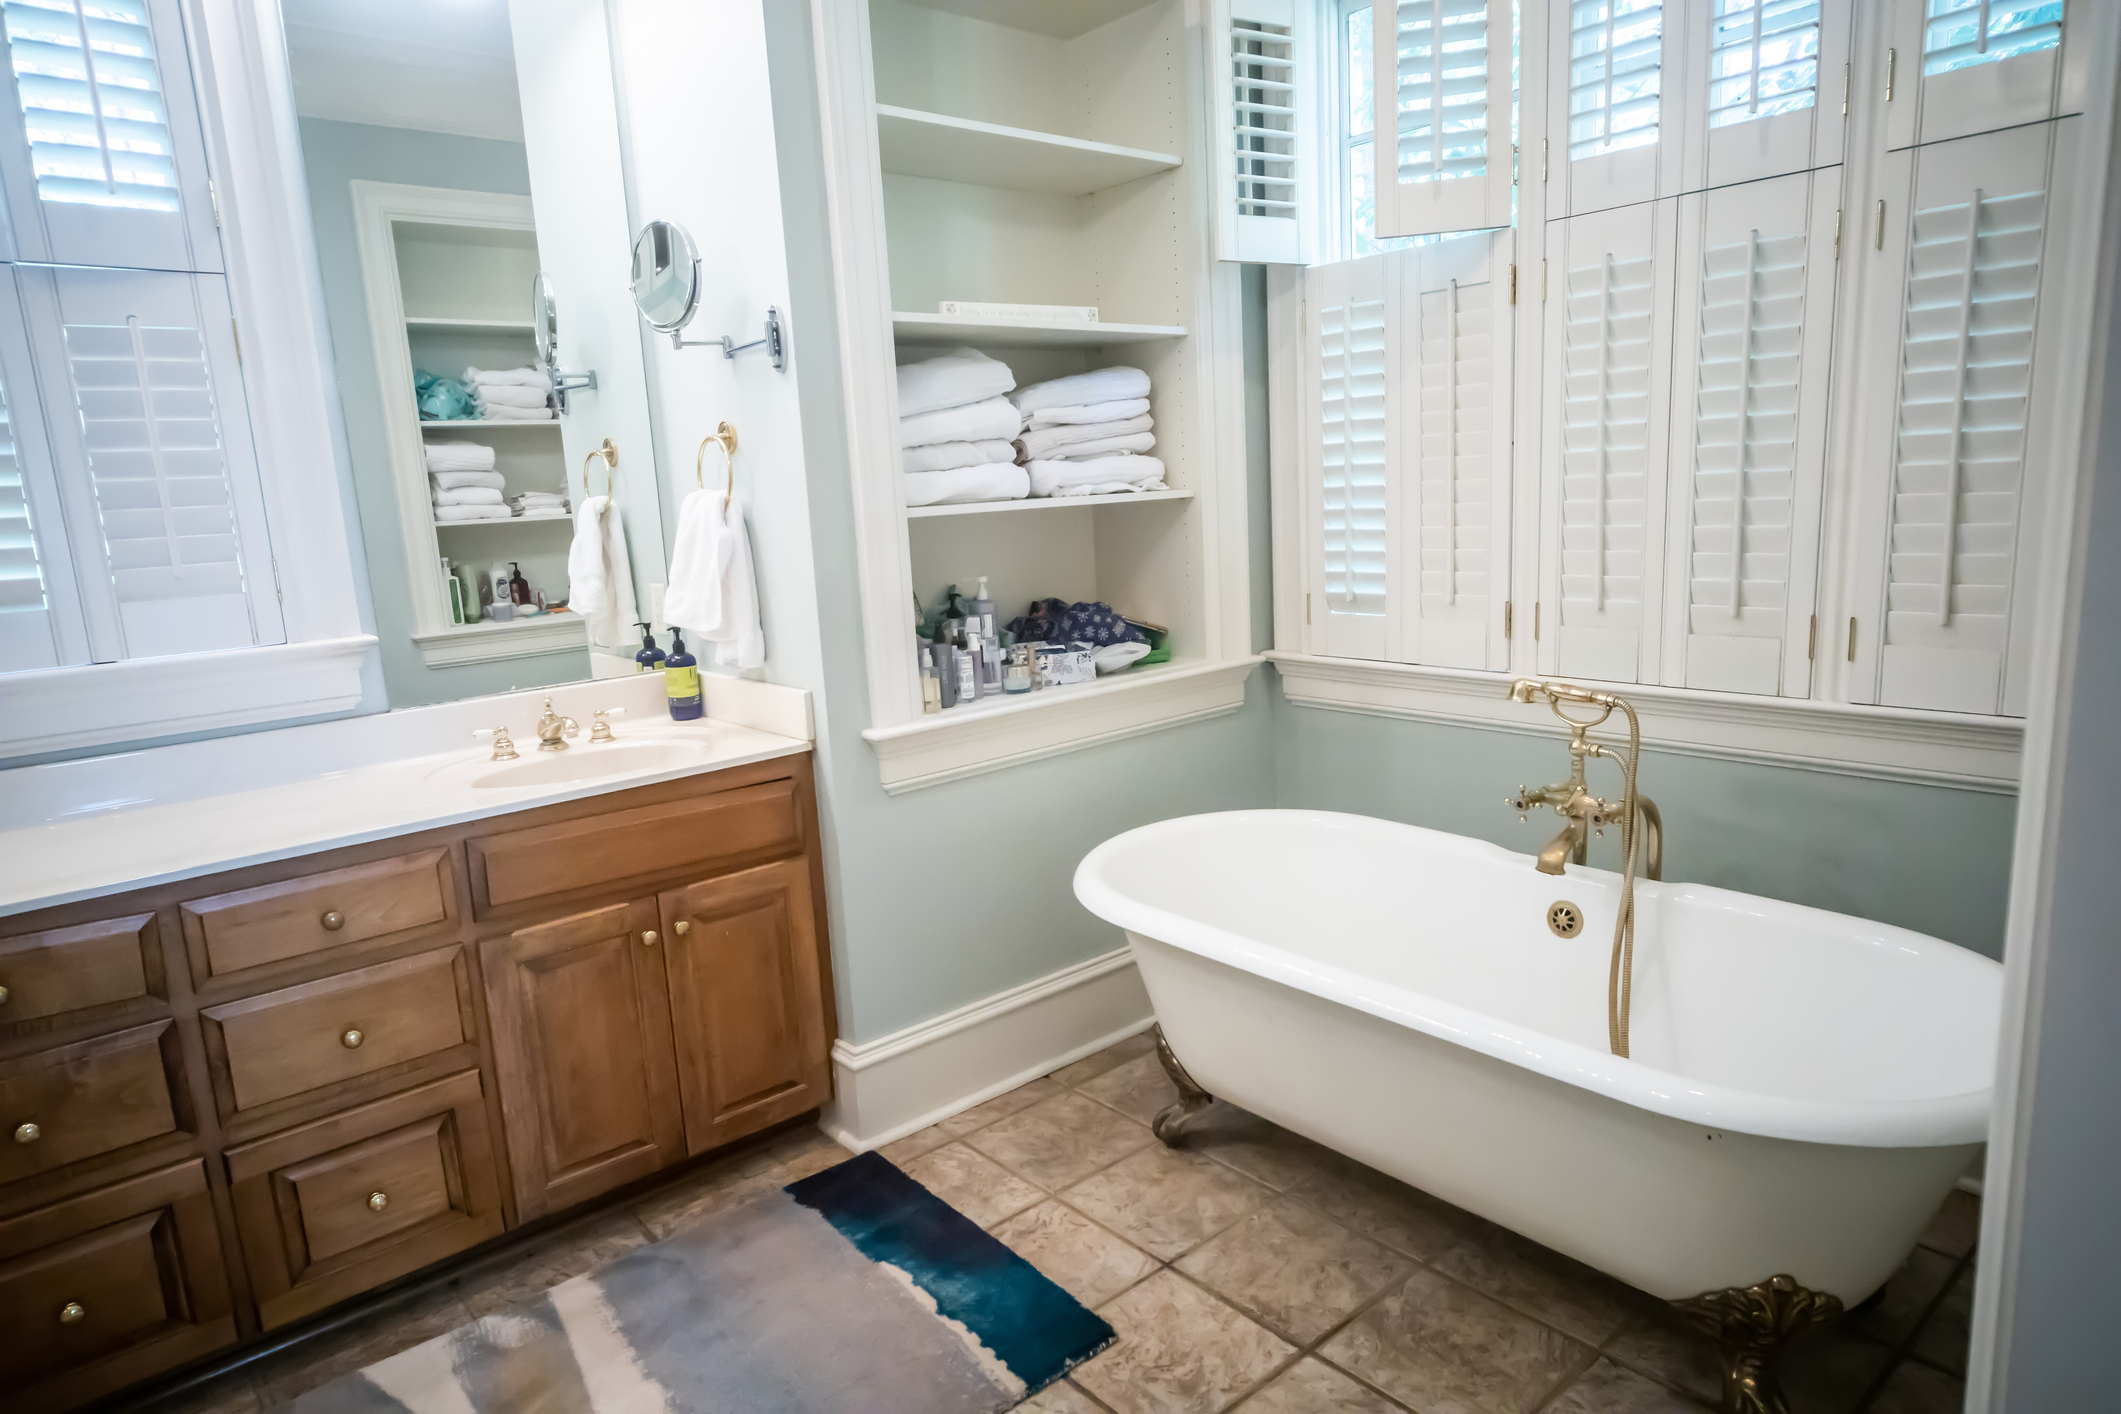 Master Bathroom In a Large Home with Vaulted Ceilings and wood inset cabinets